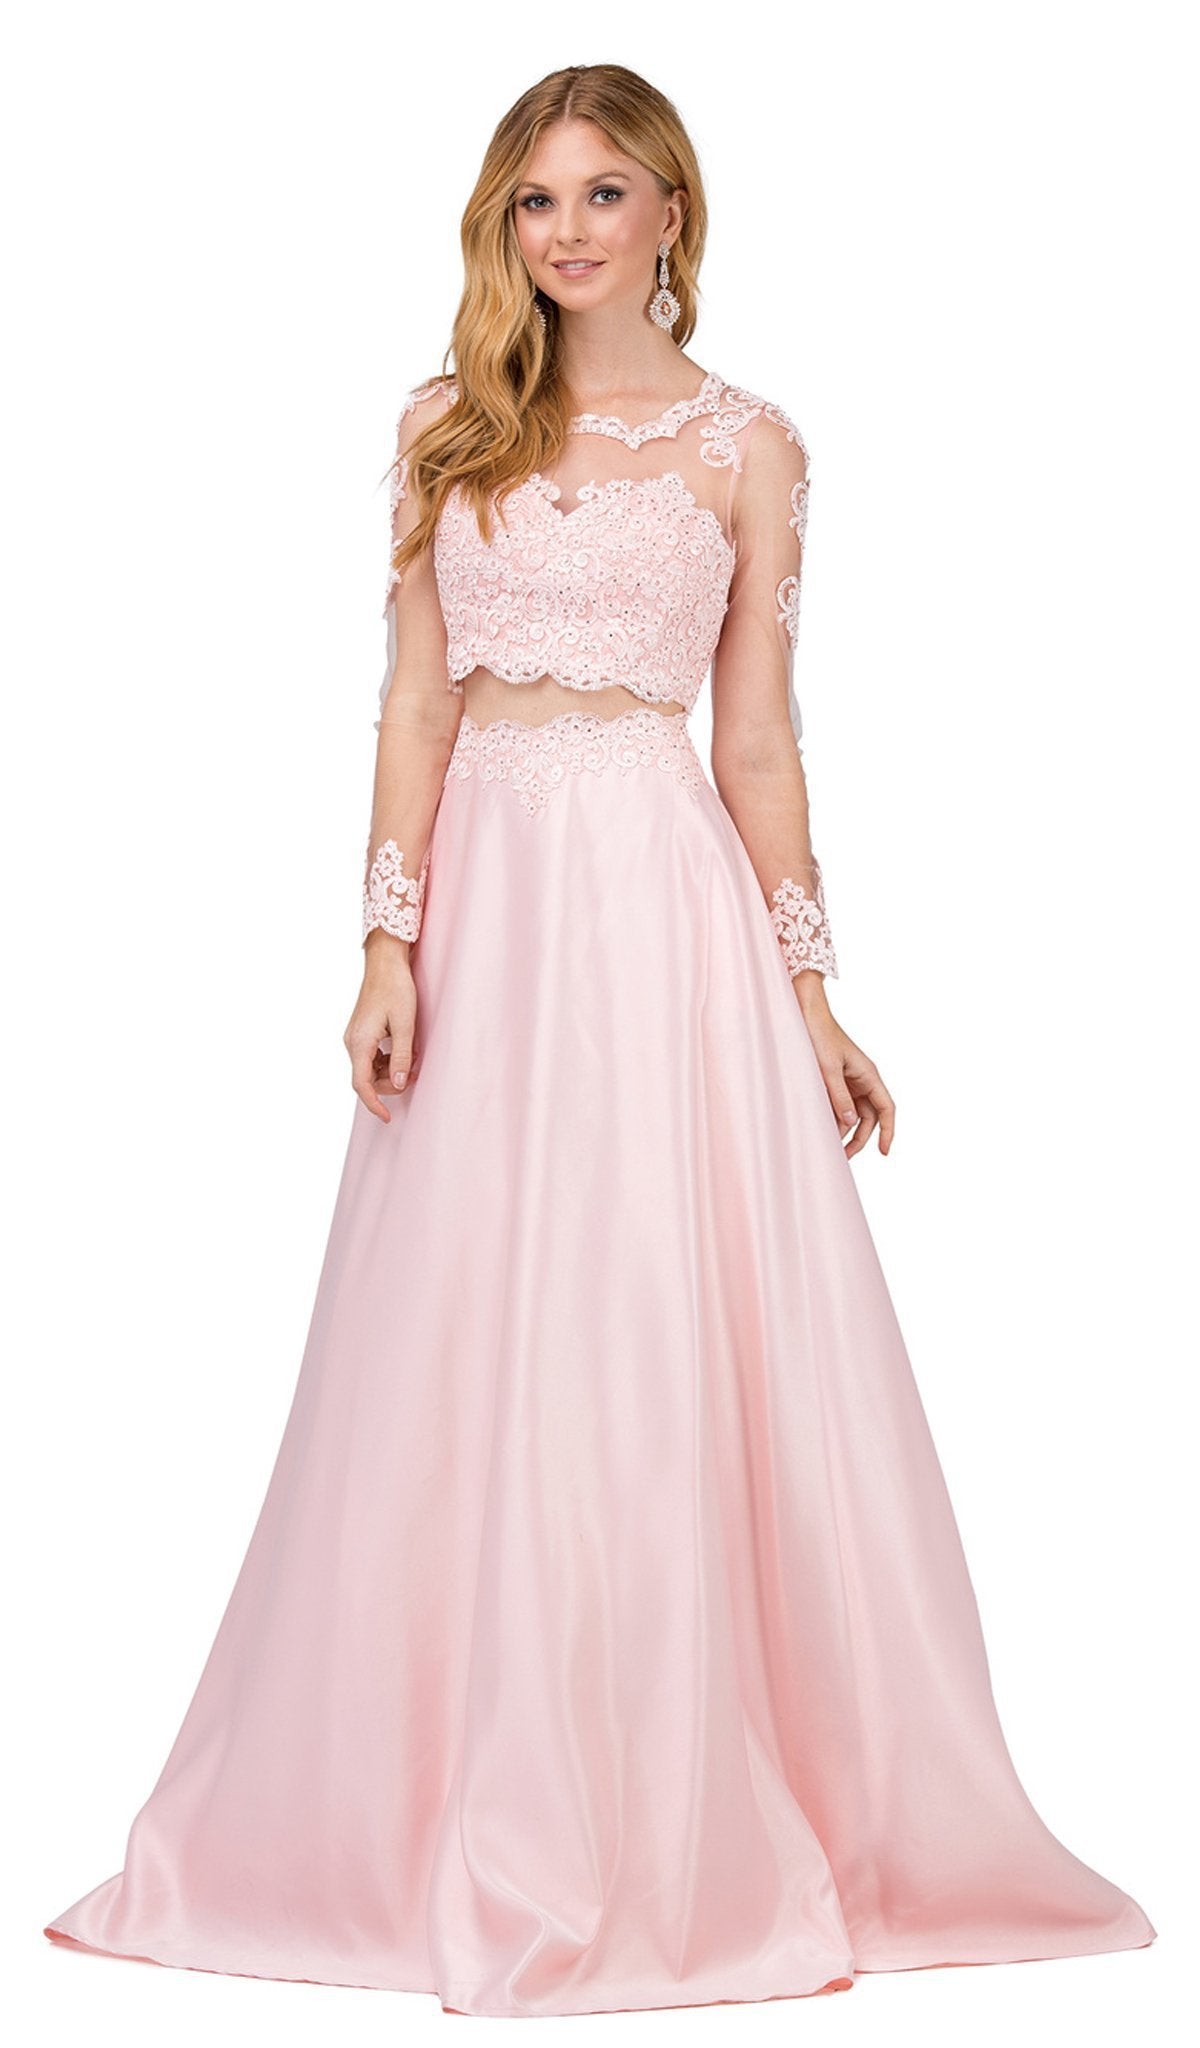 Dancing Queen - 9950 Two Piece Embellished A-line Prom Dress